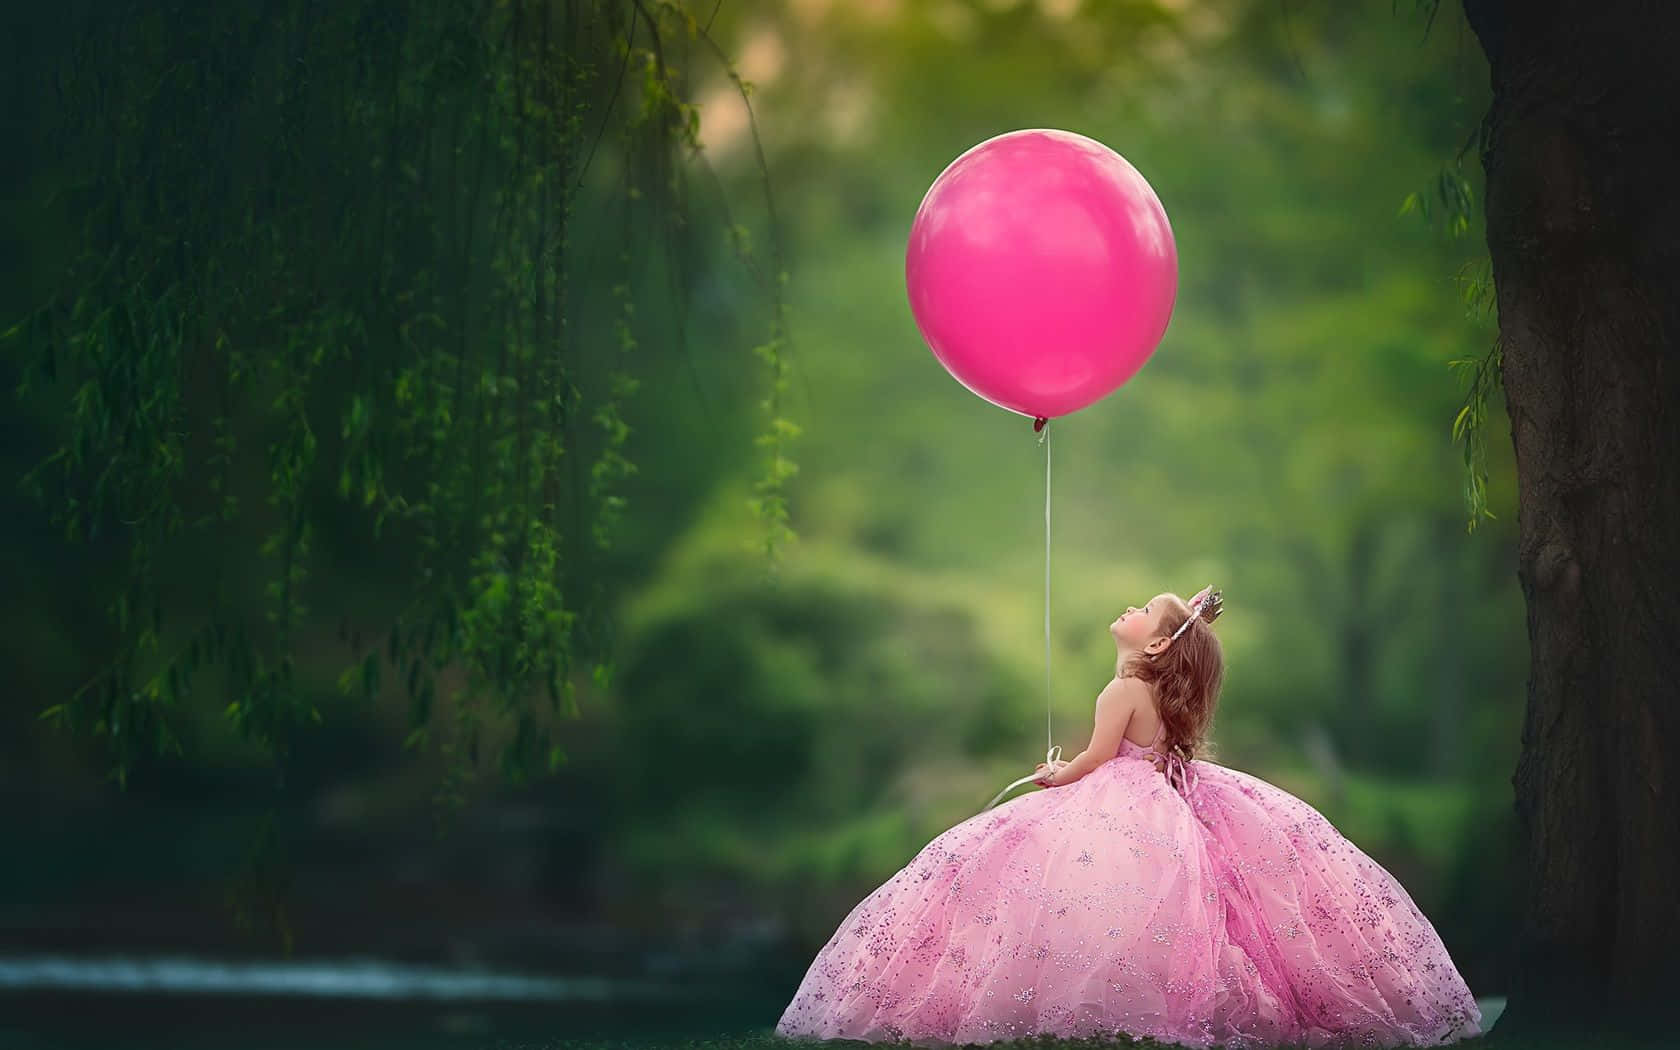 The Sky Is Limitless with a Floating Pink Balloon